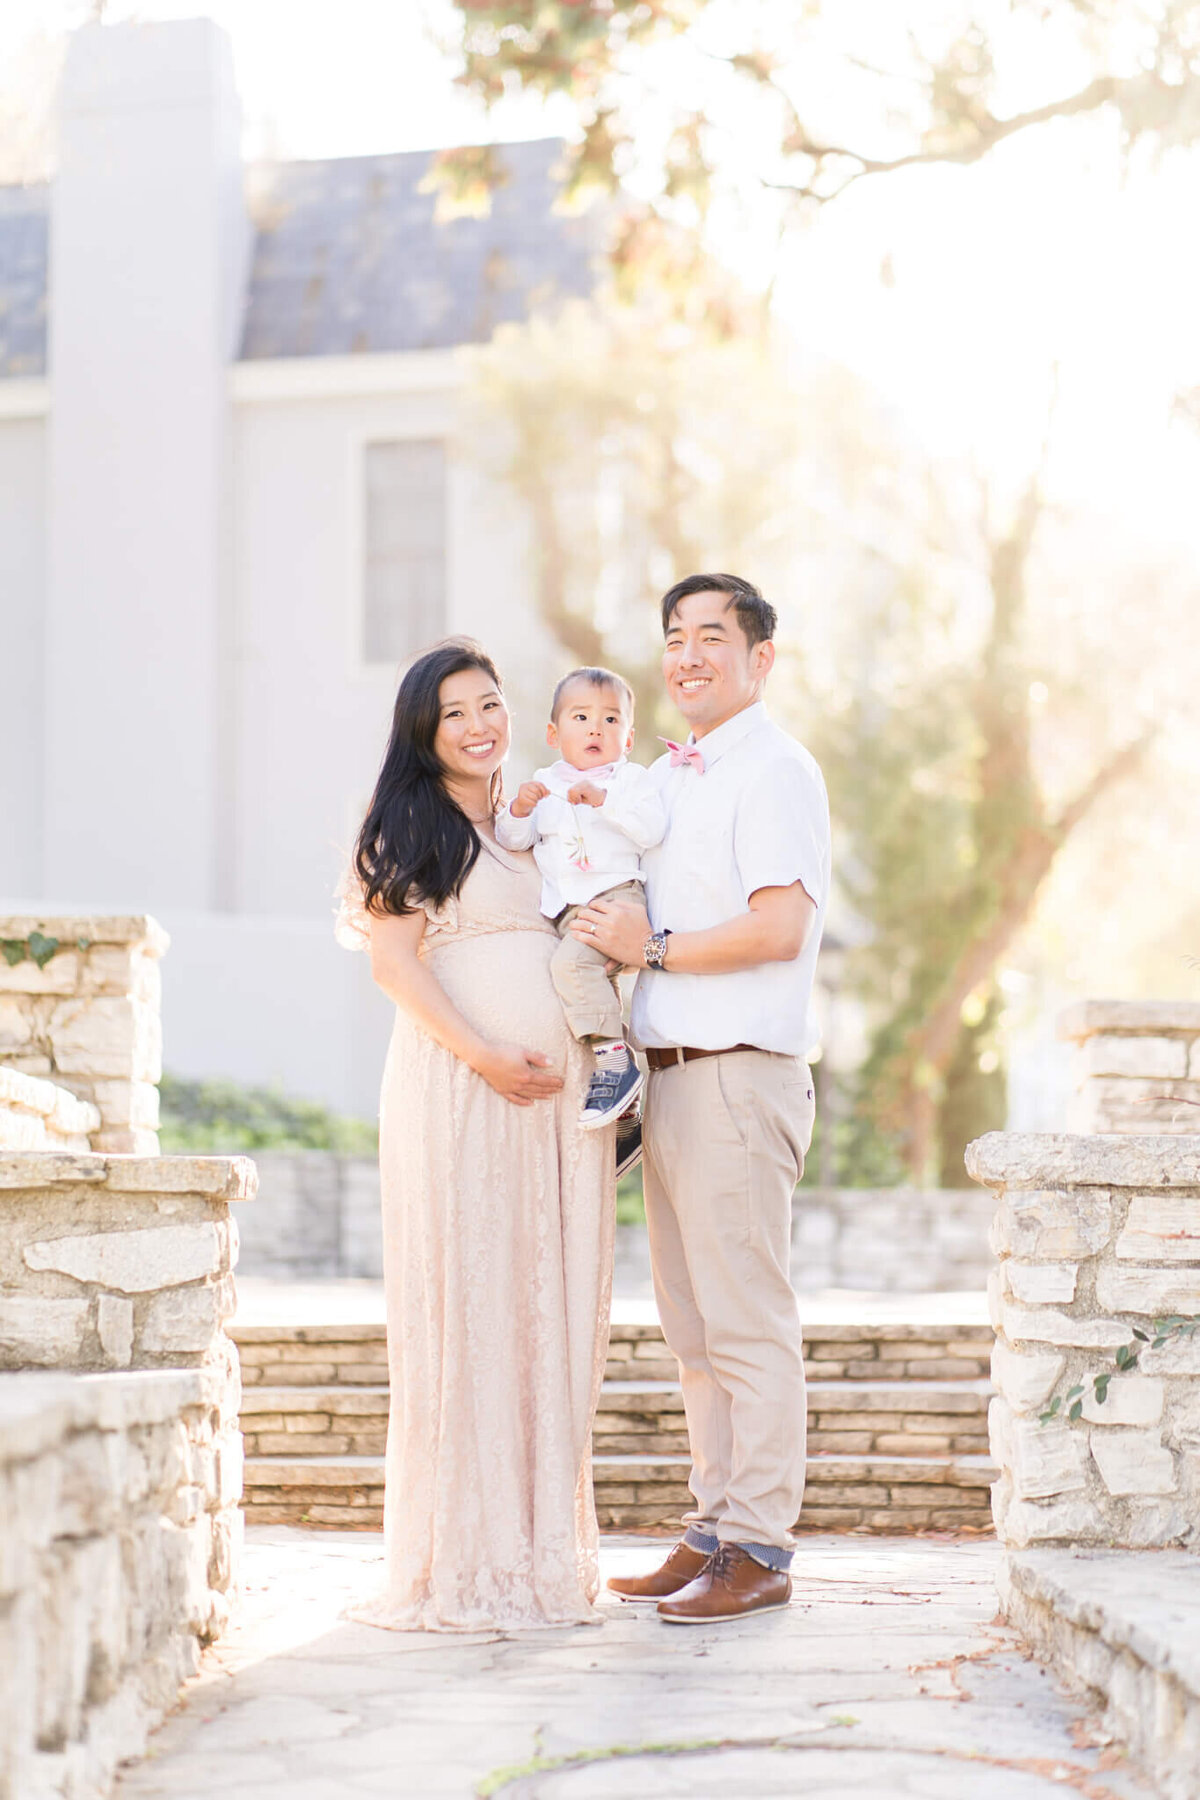 Asian family standing on brick pathway by a mansion holding son in the middle.